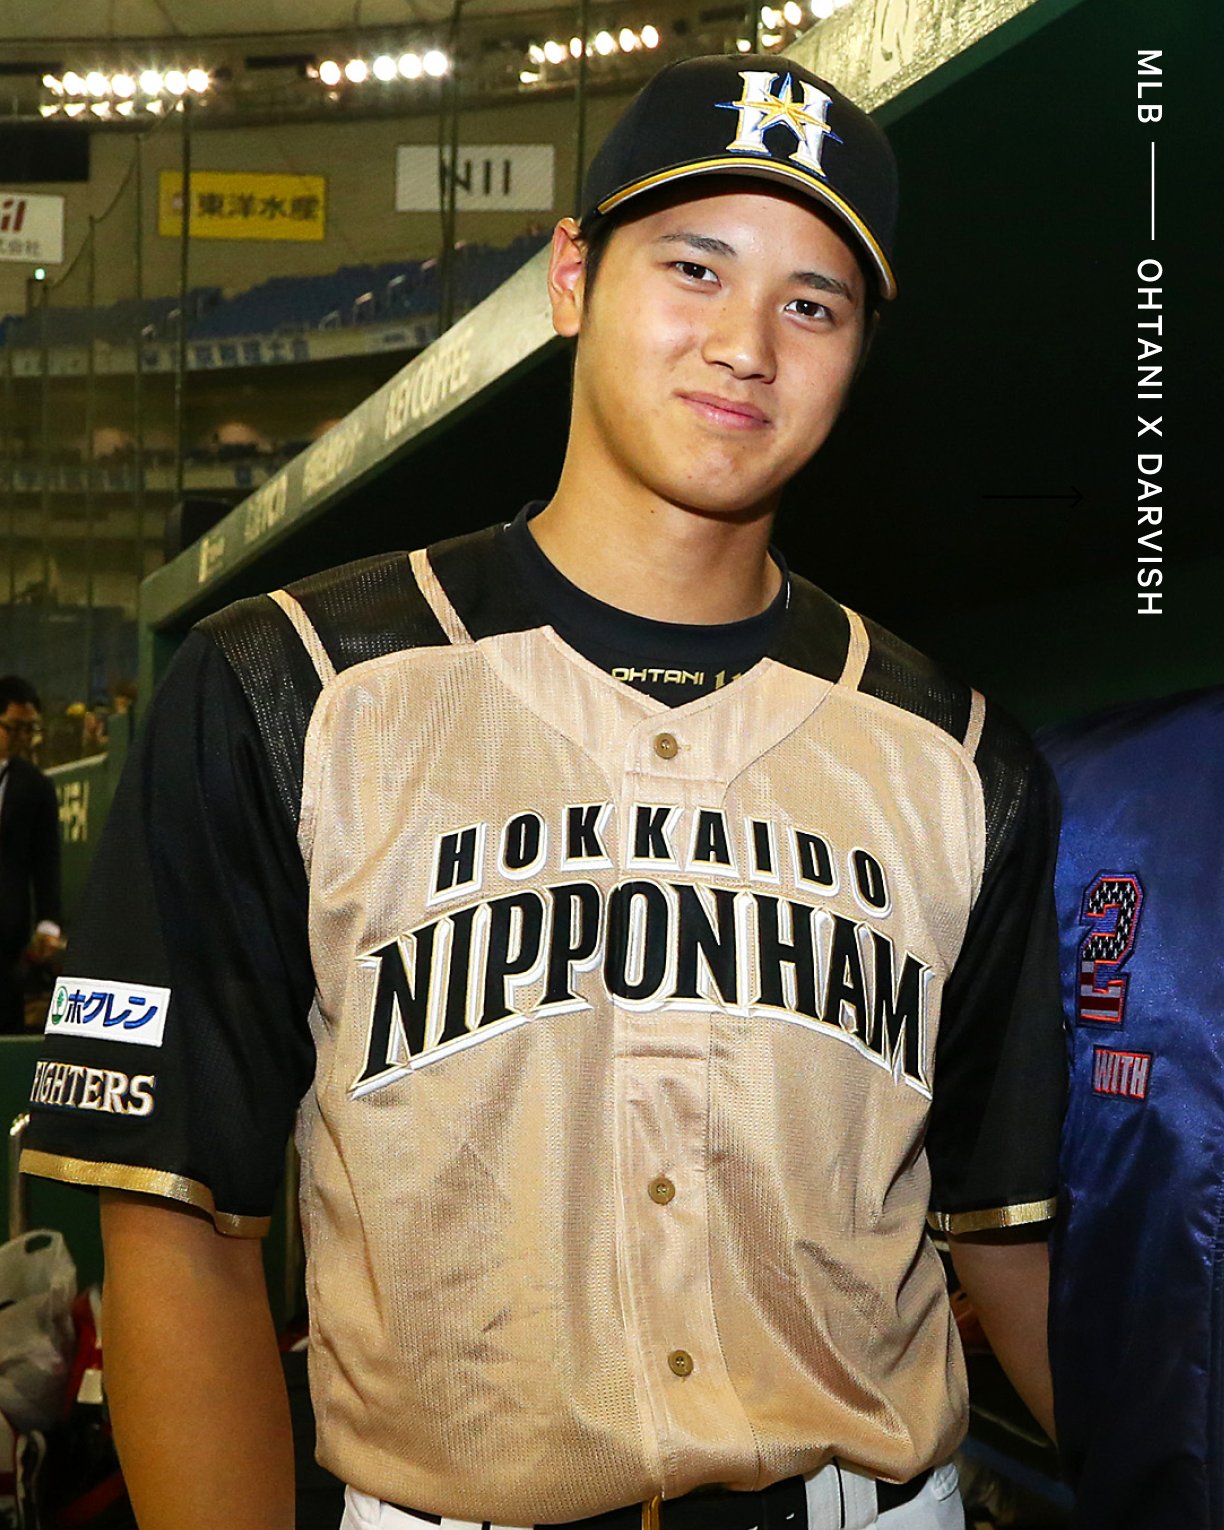 The Athletic on X: Shohei Ohtani and Yu Darvish both played for the  Hokkaido Nippon-Ham Fighters in Japan at different times. In fact, Hokkaido  offered Darvish's No. 11 jersey to Ohtani during